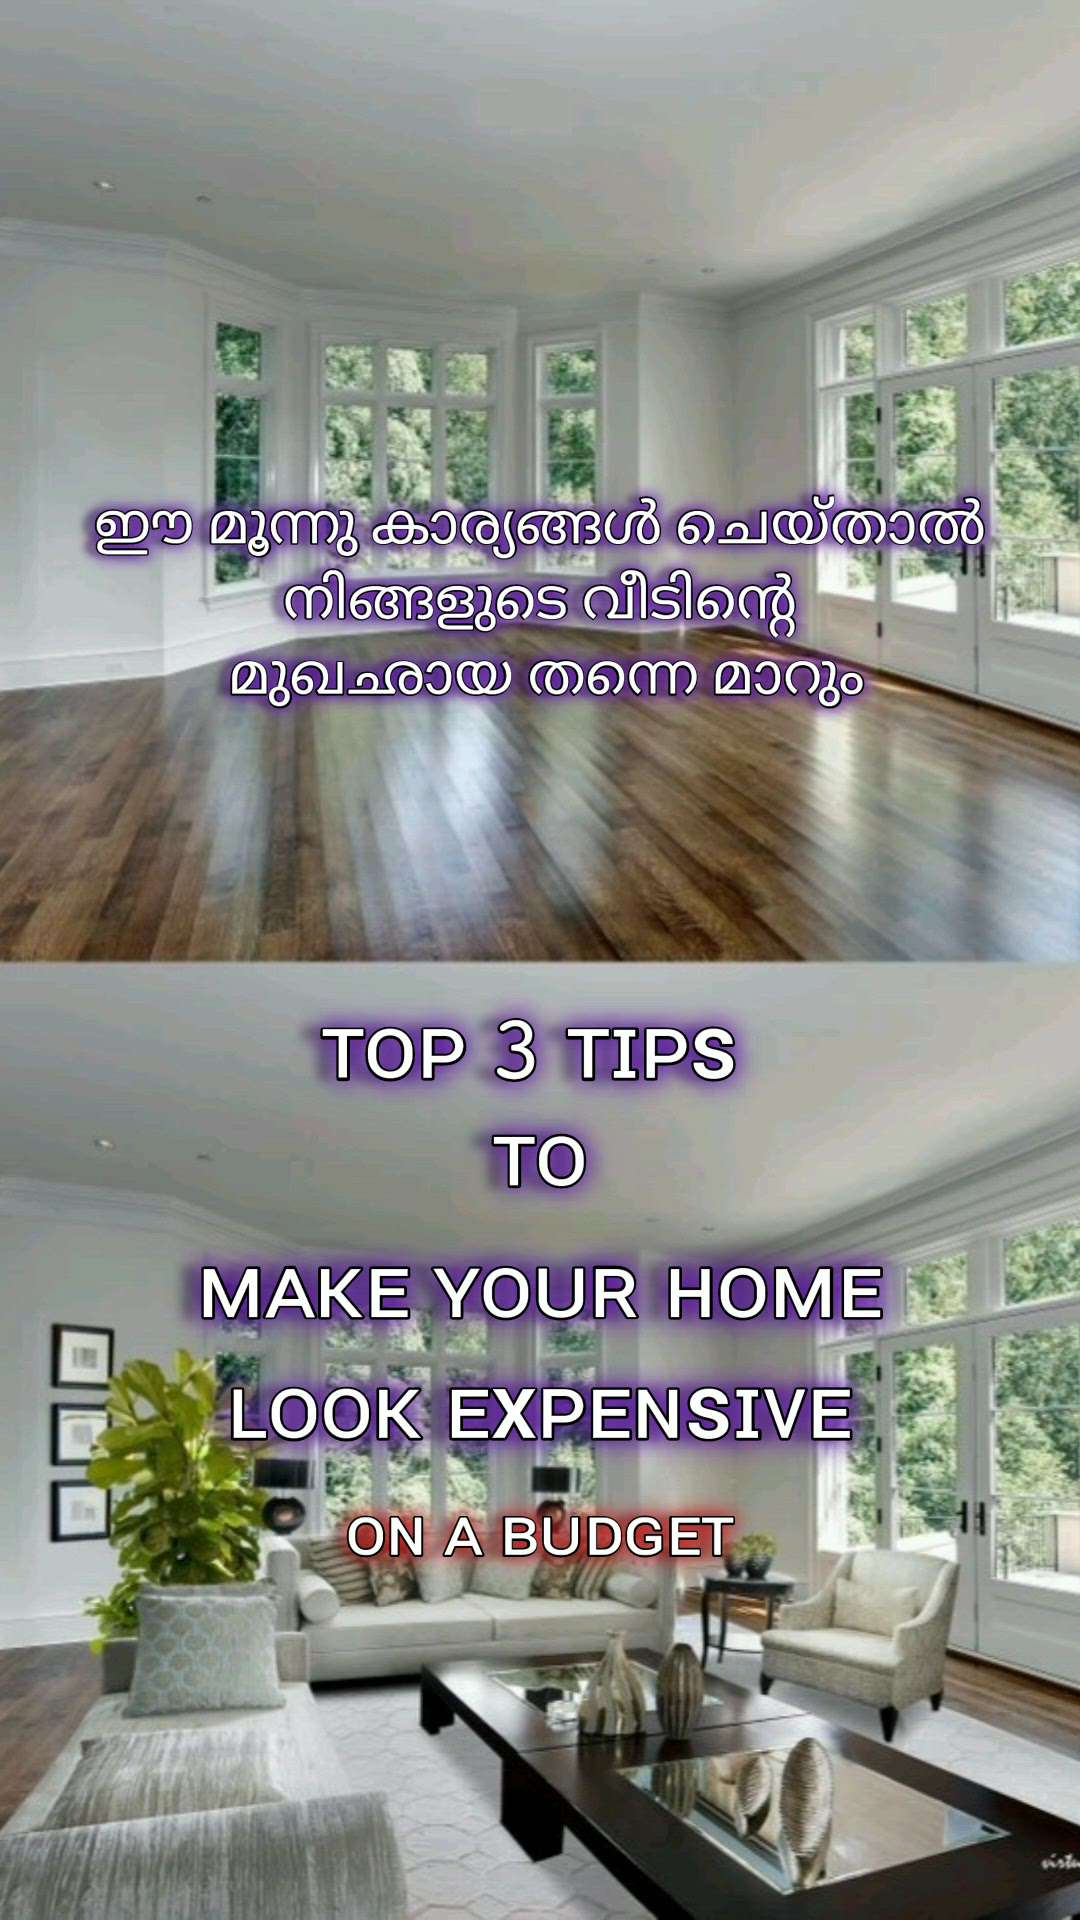 top 3 tips to make your home looks expensive

 #creatorsofkolo #Kasargod #top3tips #home #ideasforyourhome #tipsforinteriorstyle